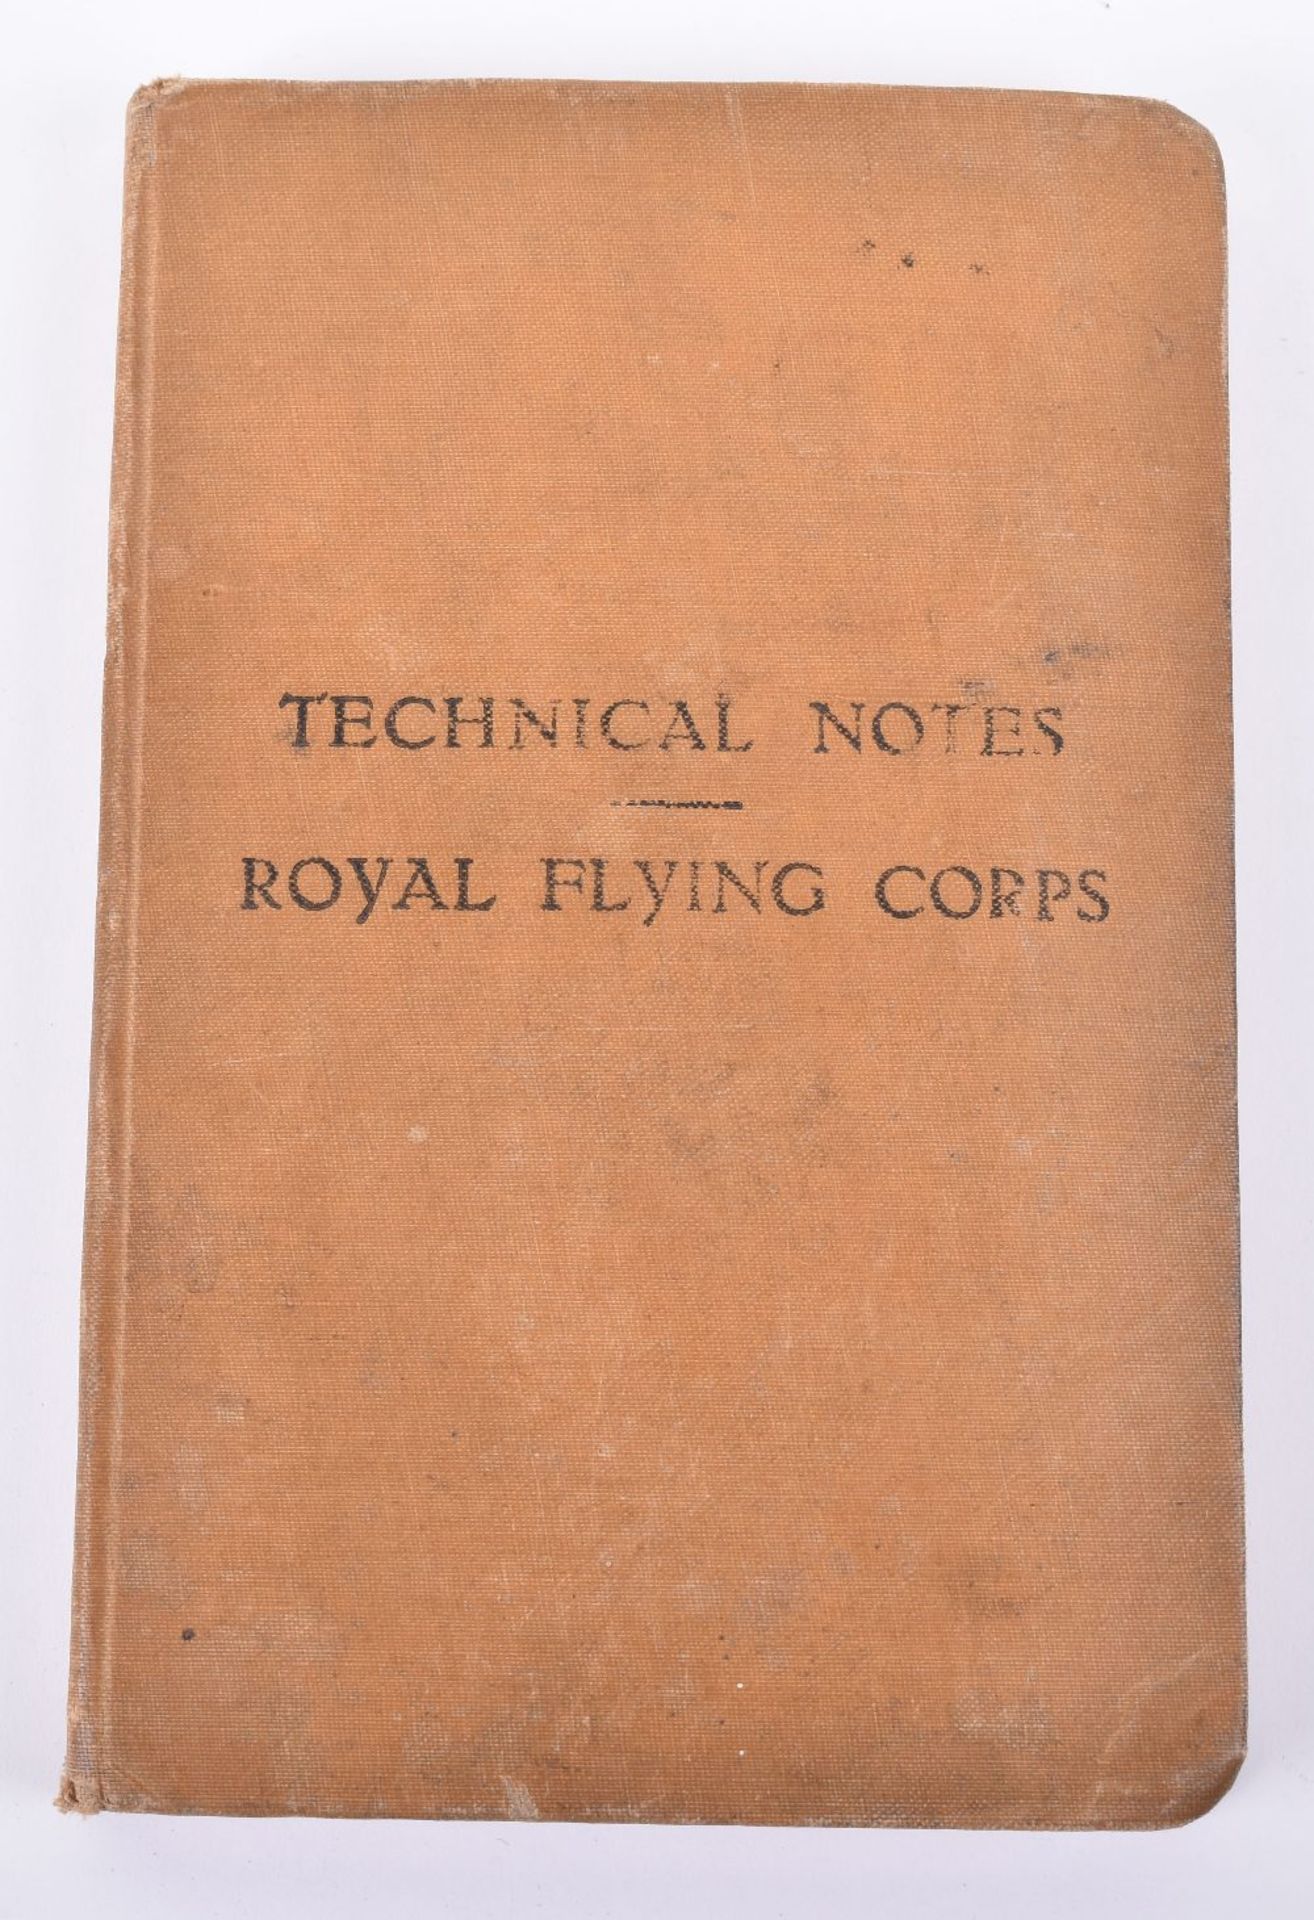 WW1 Royal Flying Corps Technical Notes